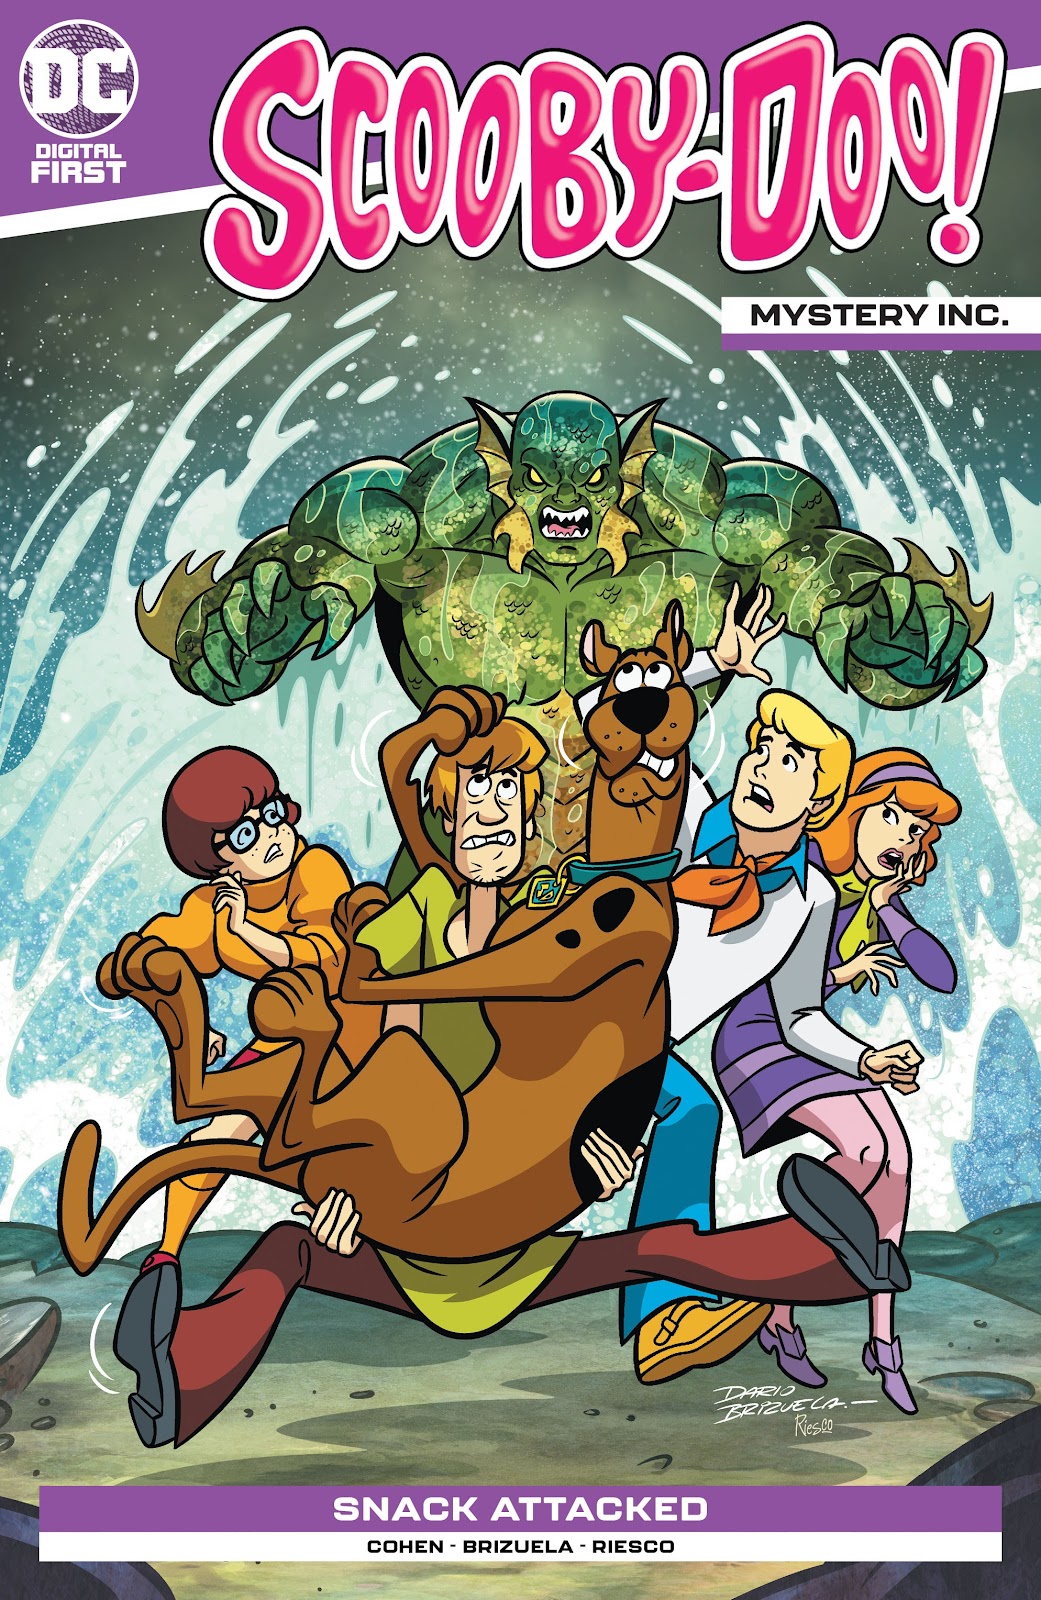 Scooby Doo Mystery Inc 1 | Read Scooby Doo Mystery Inc 1 comic online in  high quality. Read Full Comic online for free - Read comics online in high  quality .| READ COMIC ONLINE